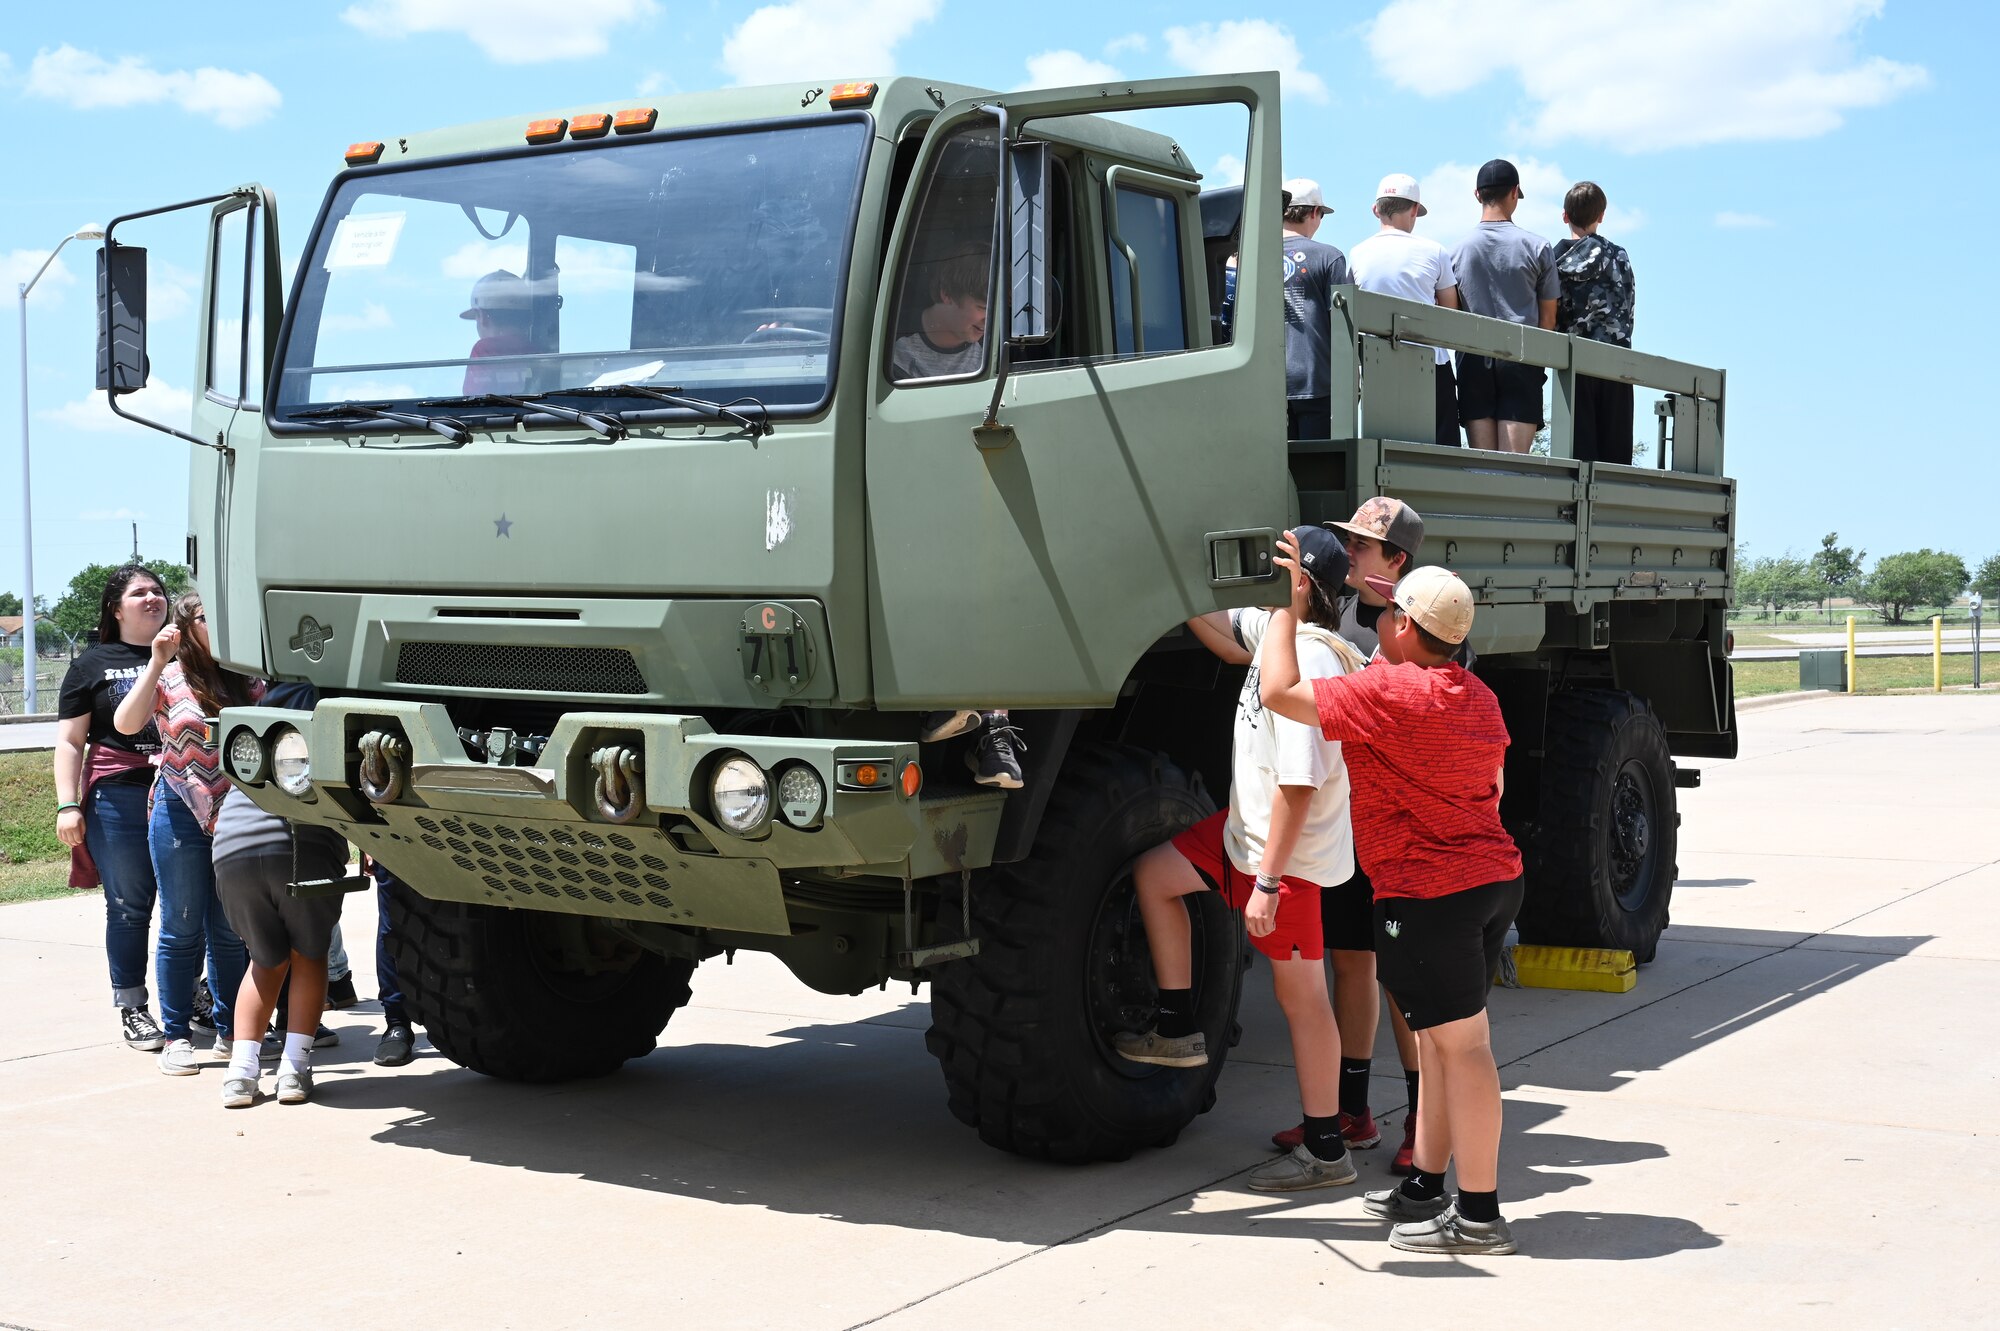 Students from Navajo Public Schools explore a light medium tactical vehicle at the 97th Logistics Readiness Squadron during the Aviation Inspiration and Mentorship (AIM) Wing tour at Altus Air Force Base, Oklahoma, May 10, 2023. The AIM tour provided hands-on learning opportunities highlighting different job functions available in the Air Force. (U.S. Air Force photo by Airman 1st Class Heidi Bucins)